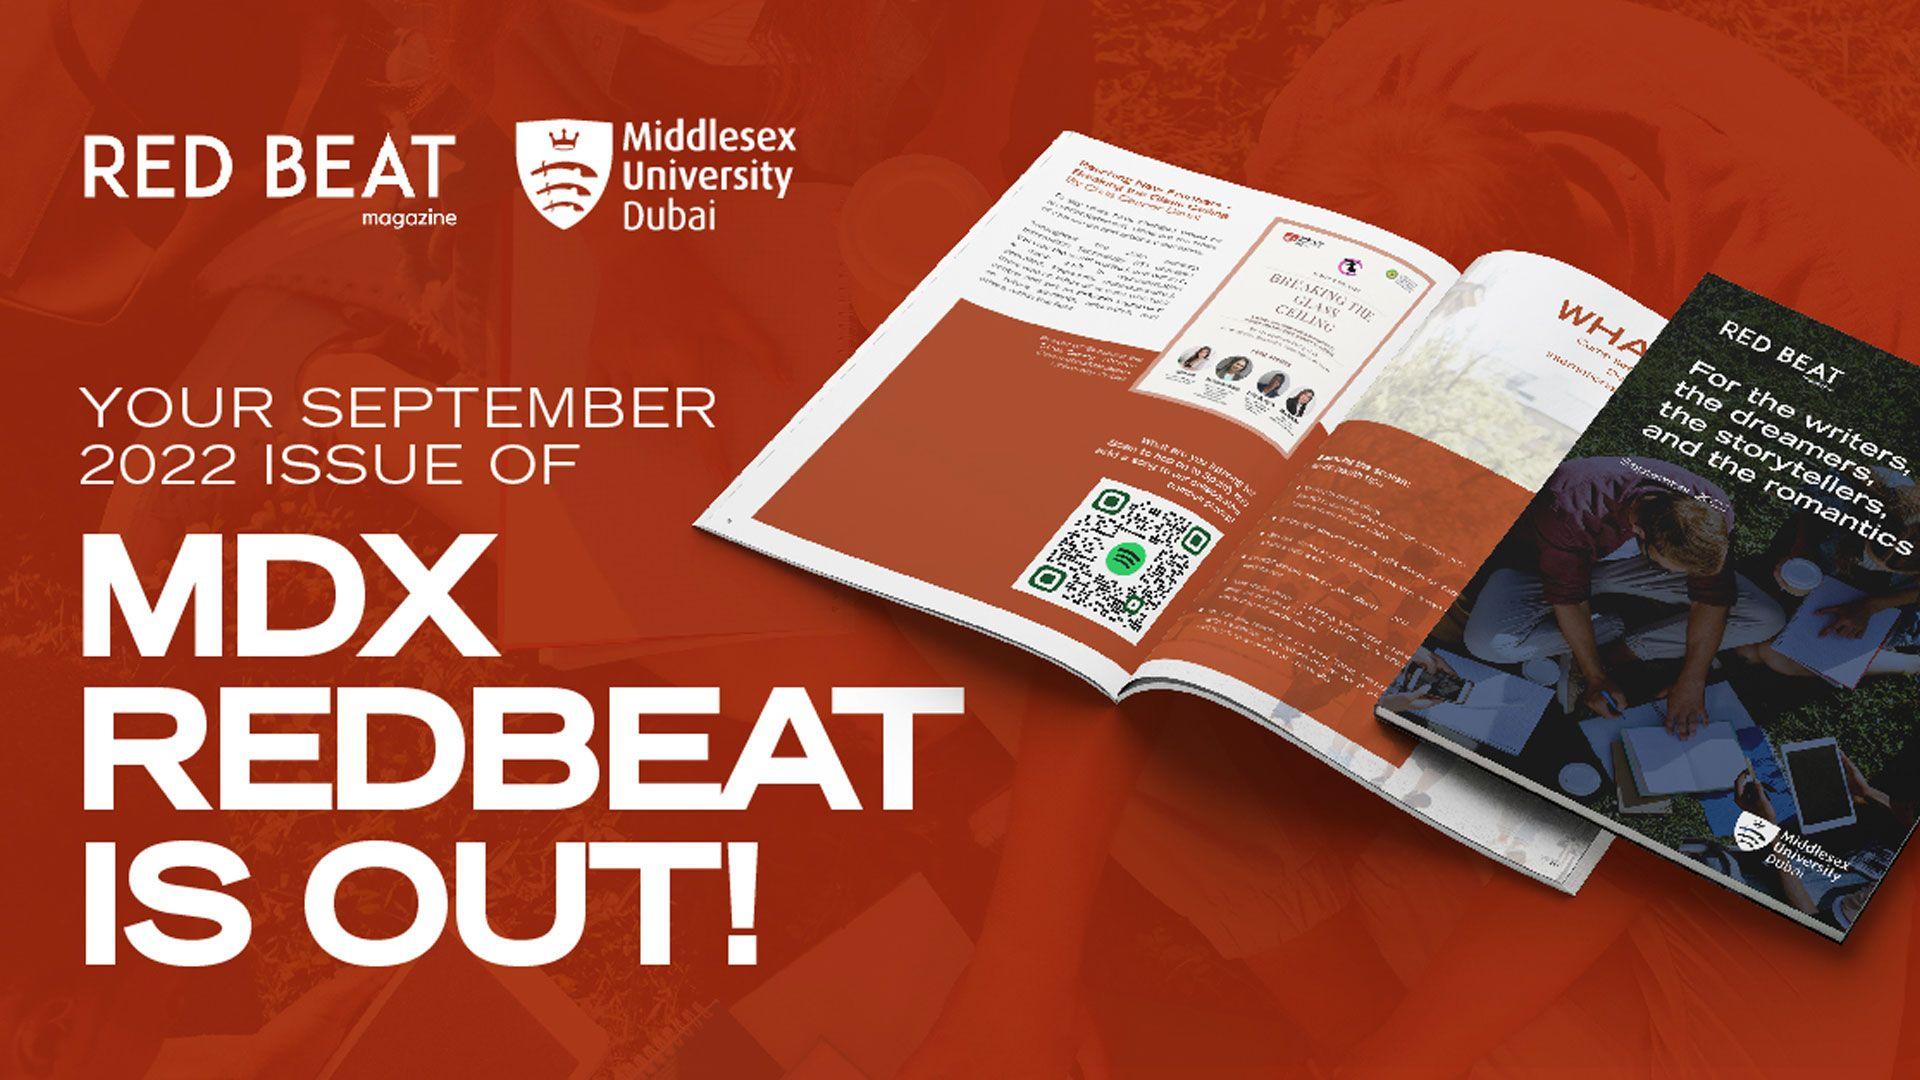 The special start of term edition of your student magazine, MDX RedBeat, is out now. Featuring reviews of some of the best and most interesting food concepts across Dubai, thought-provoking poetry and insightful journalism, the Fall 2022 edition of MDX RedBeat gives you a taste of the content you can expect from the magazine this academic year. 